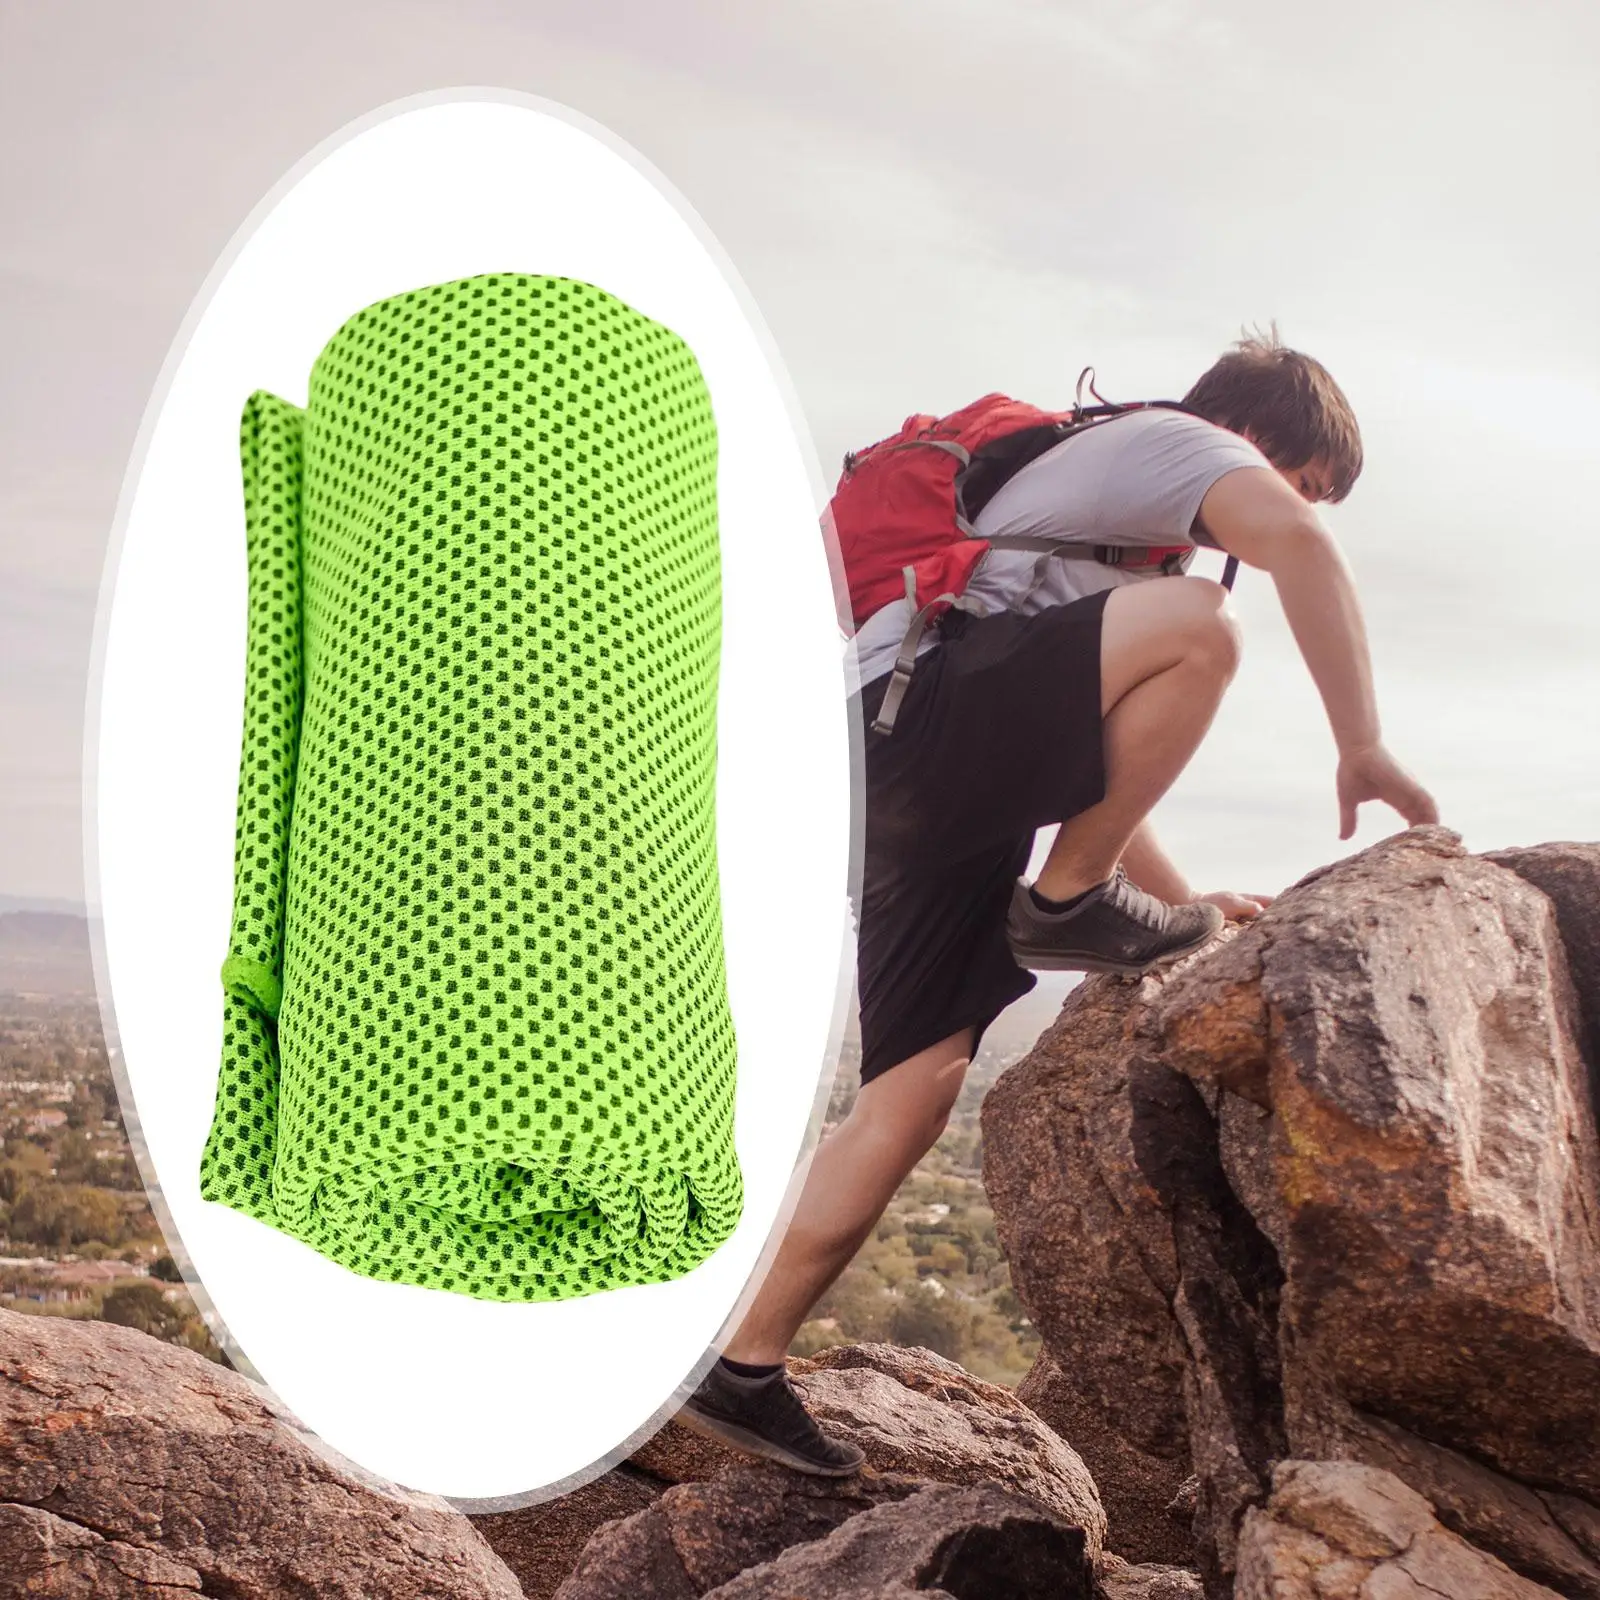 Breathable Chilly Towel Neck Wrap Cool Towel for Camping Jogging Pilates